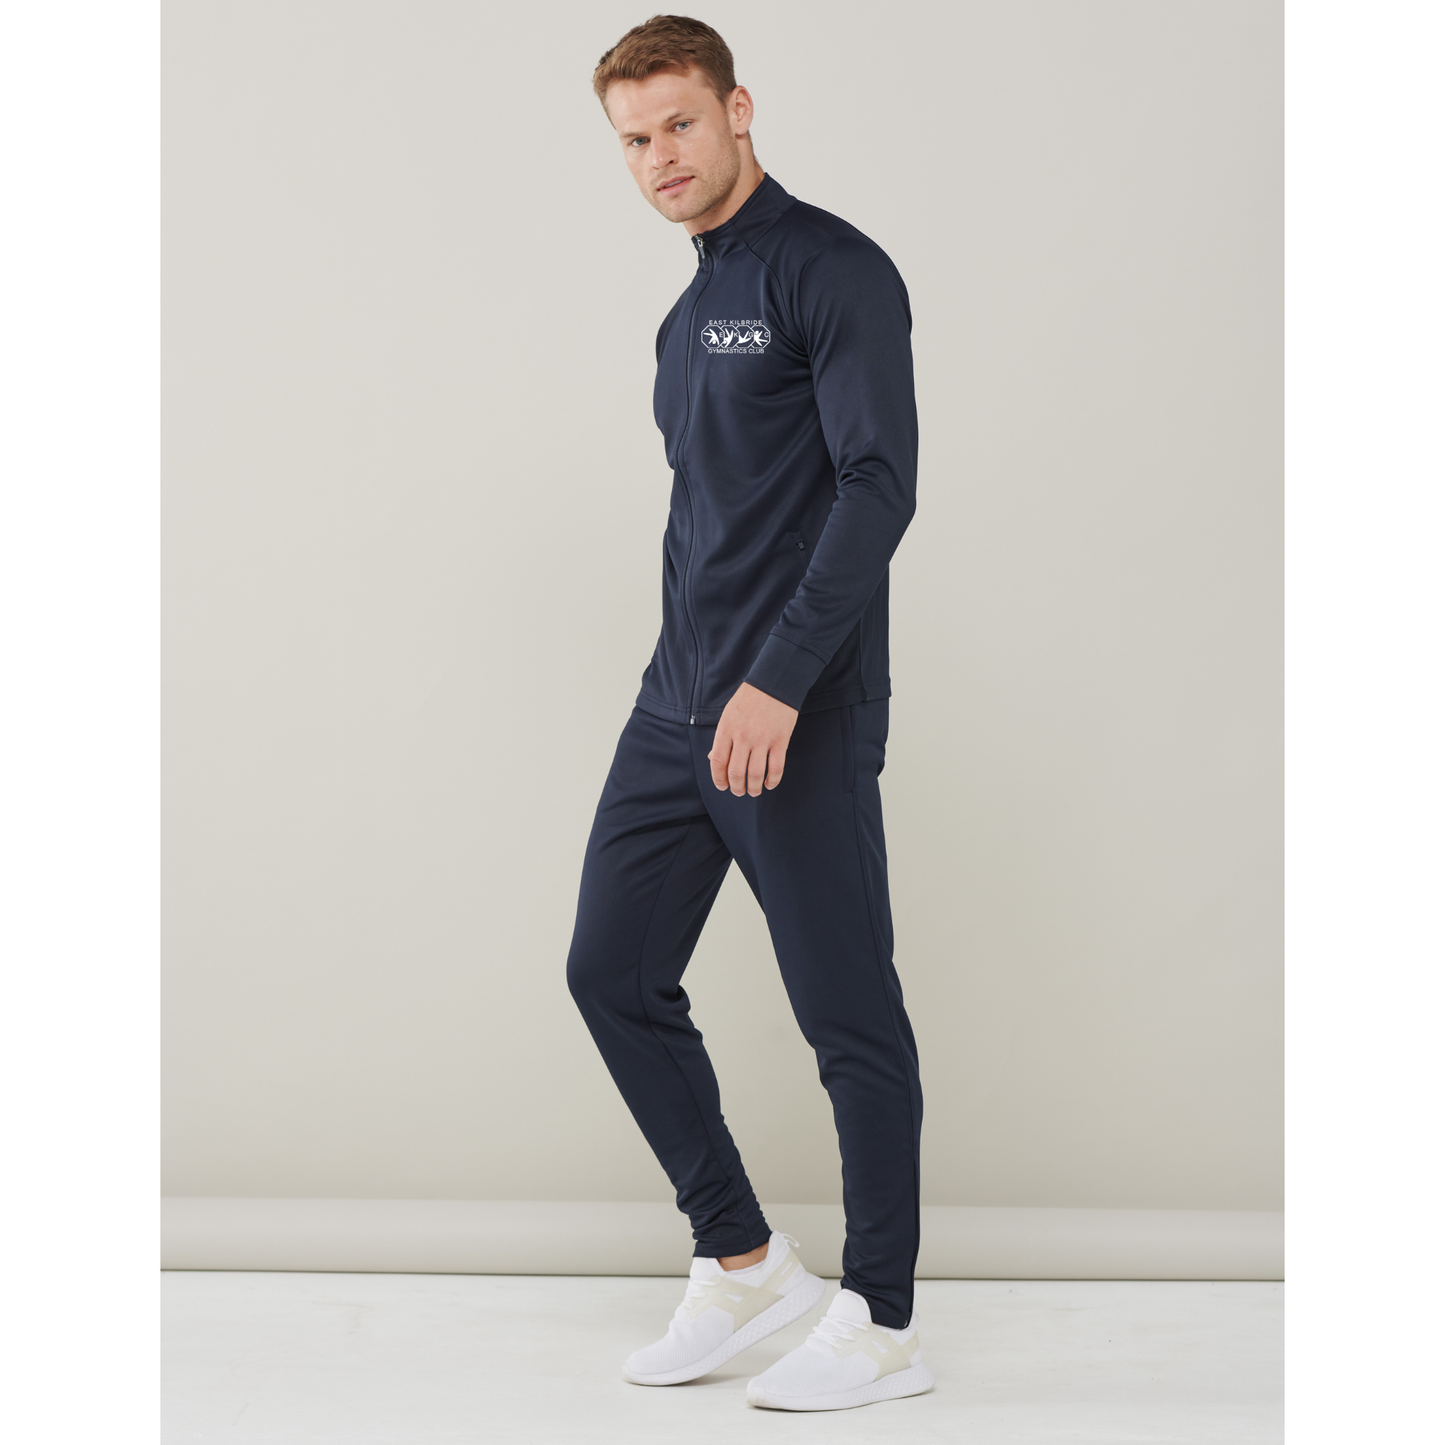 EKGC - COACH Competition Tracksuit Top ONLY - Full Zip